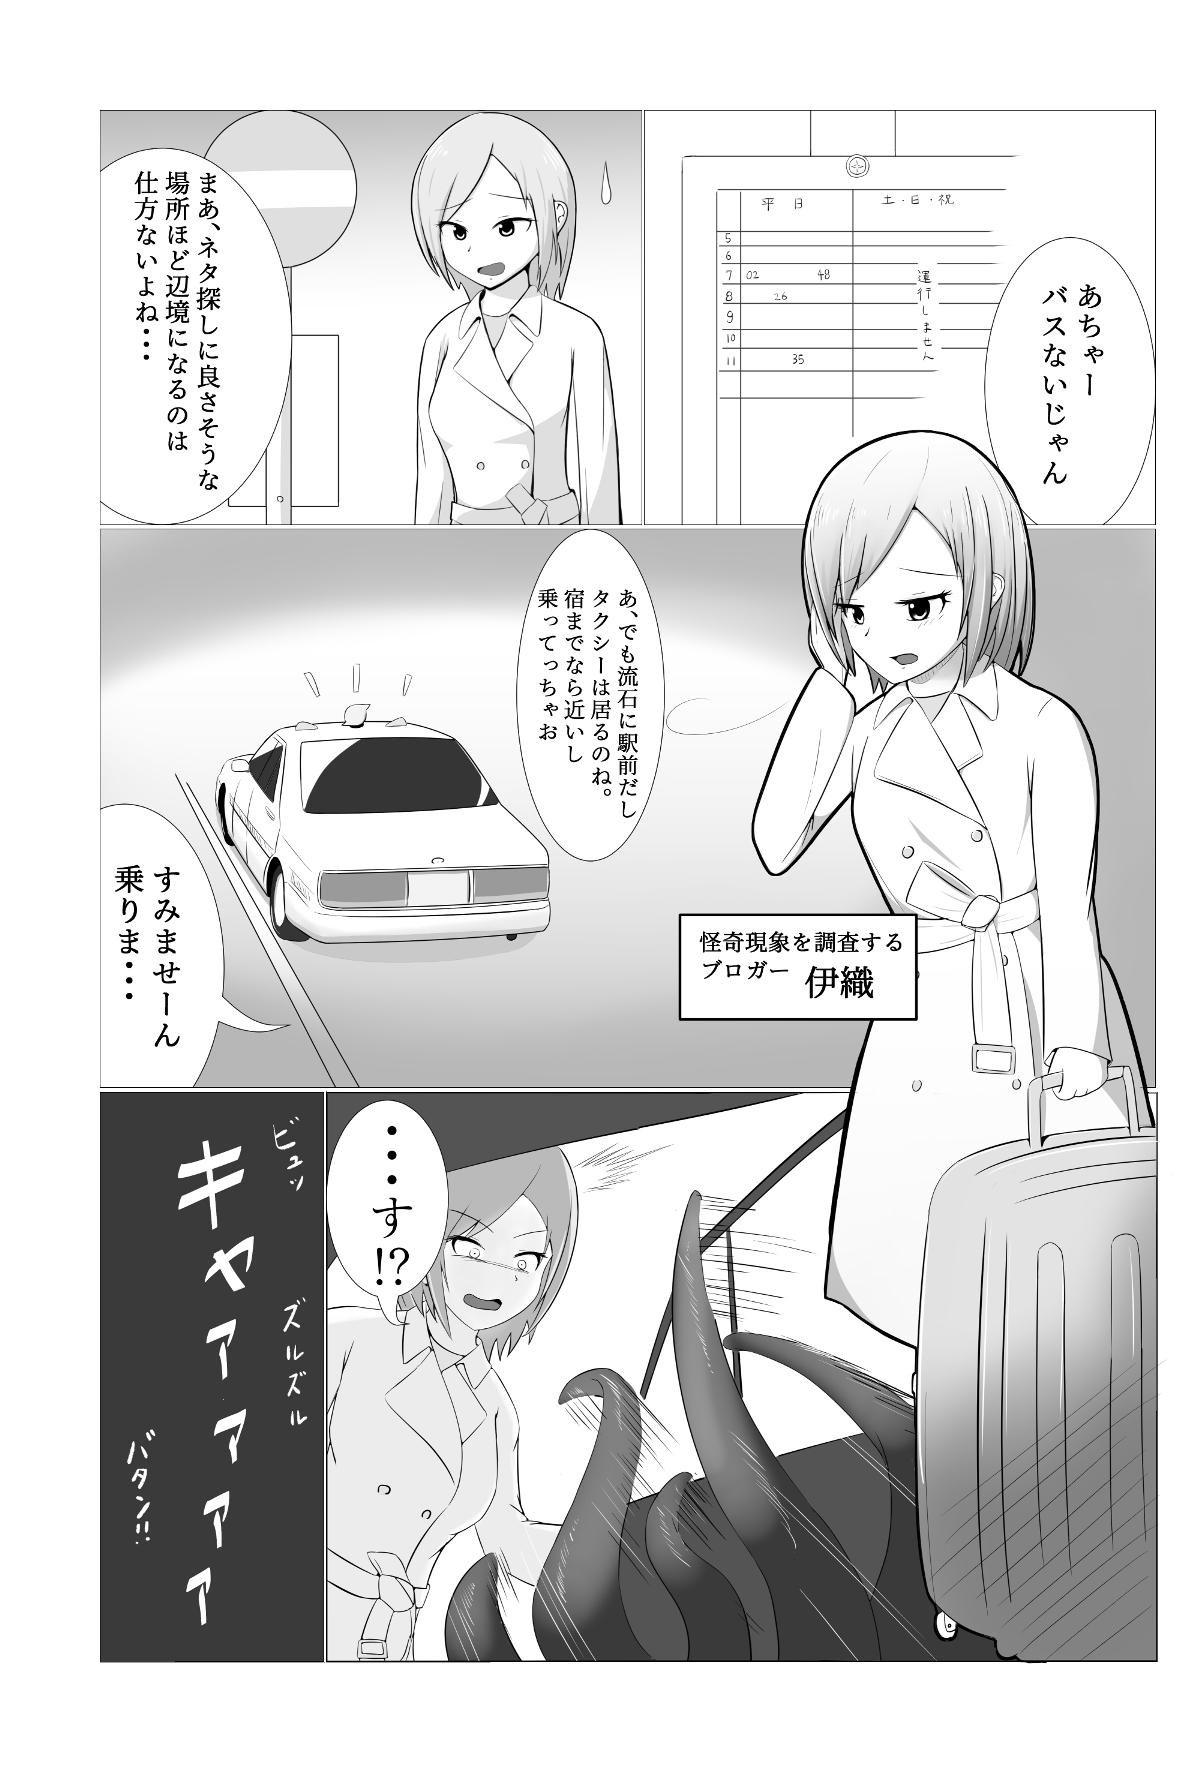 Full Surprisingly, the taxi turned out to be a mimic! - Original Amateurs - Page 3